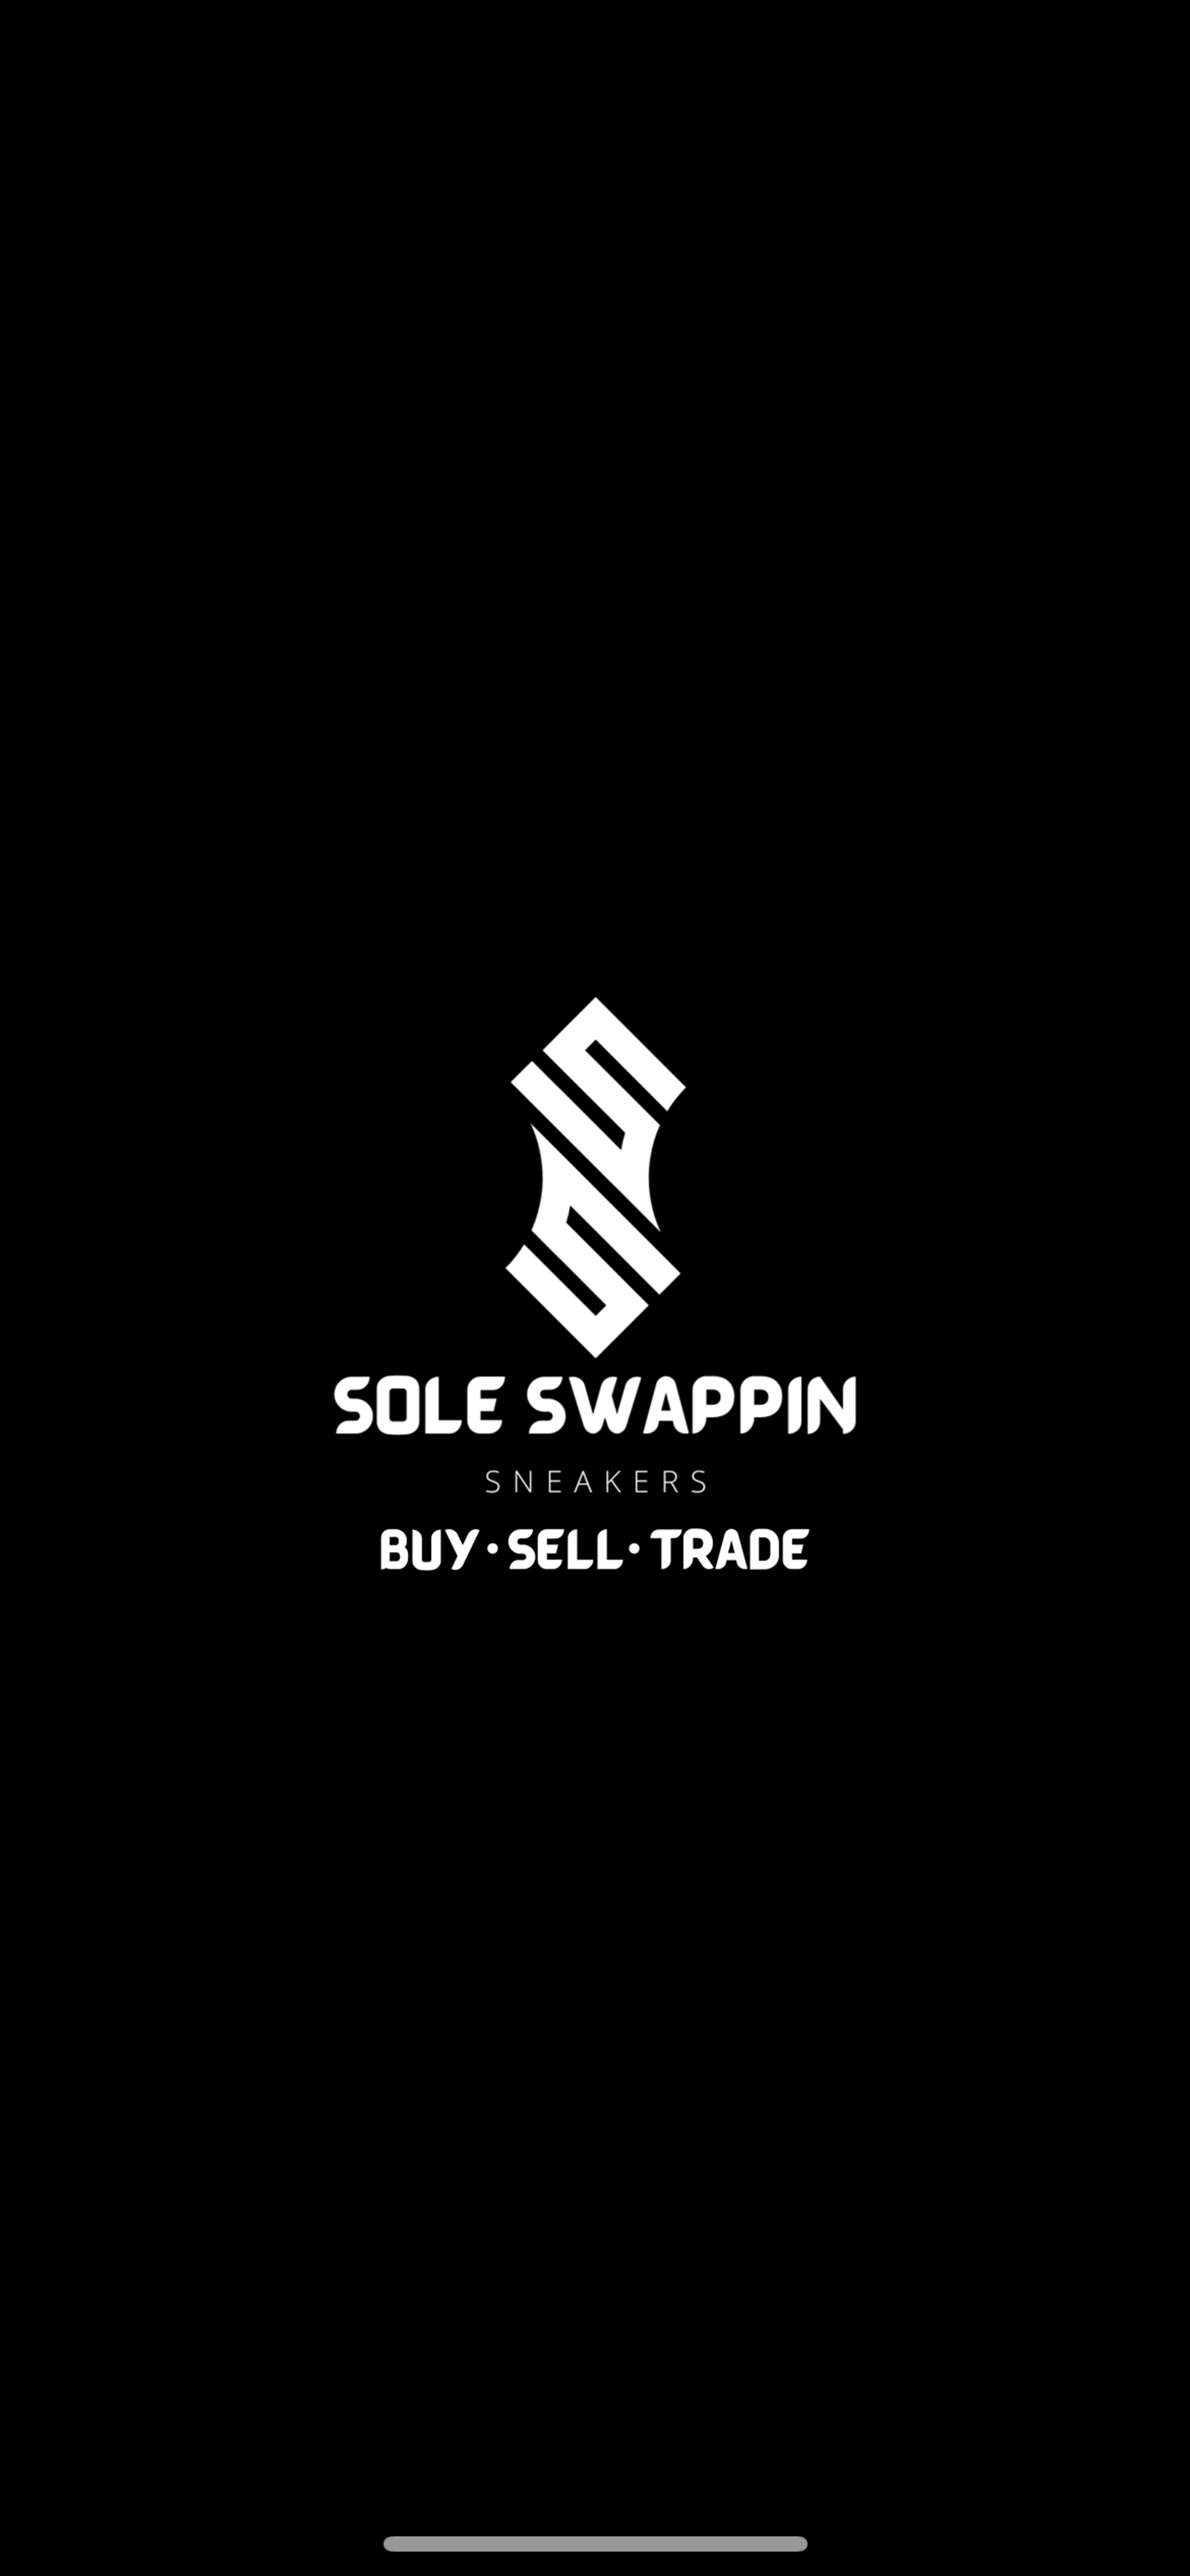 Sole Swappin LLC